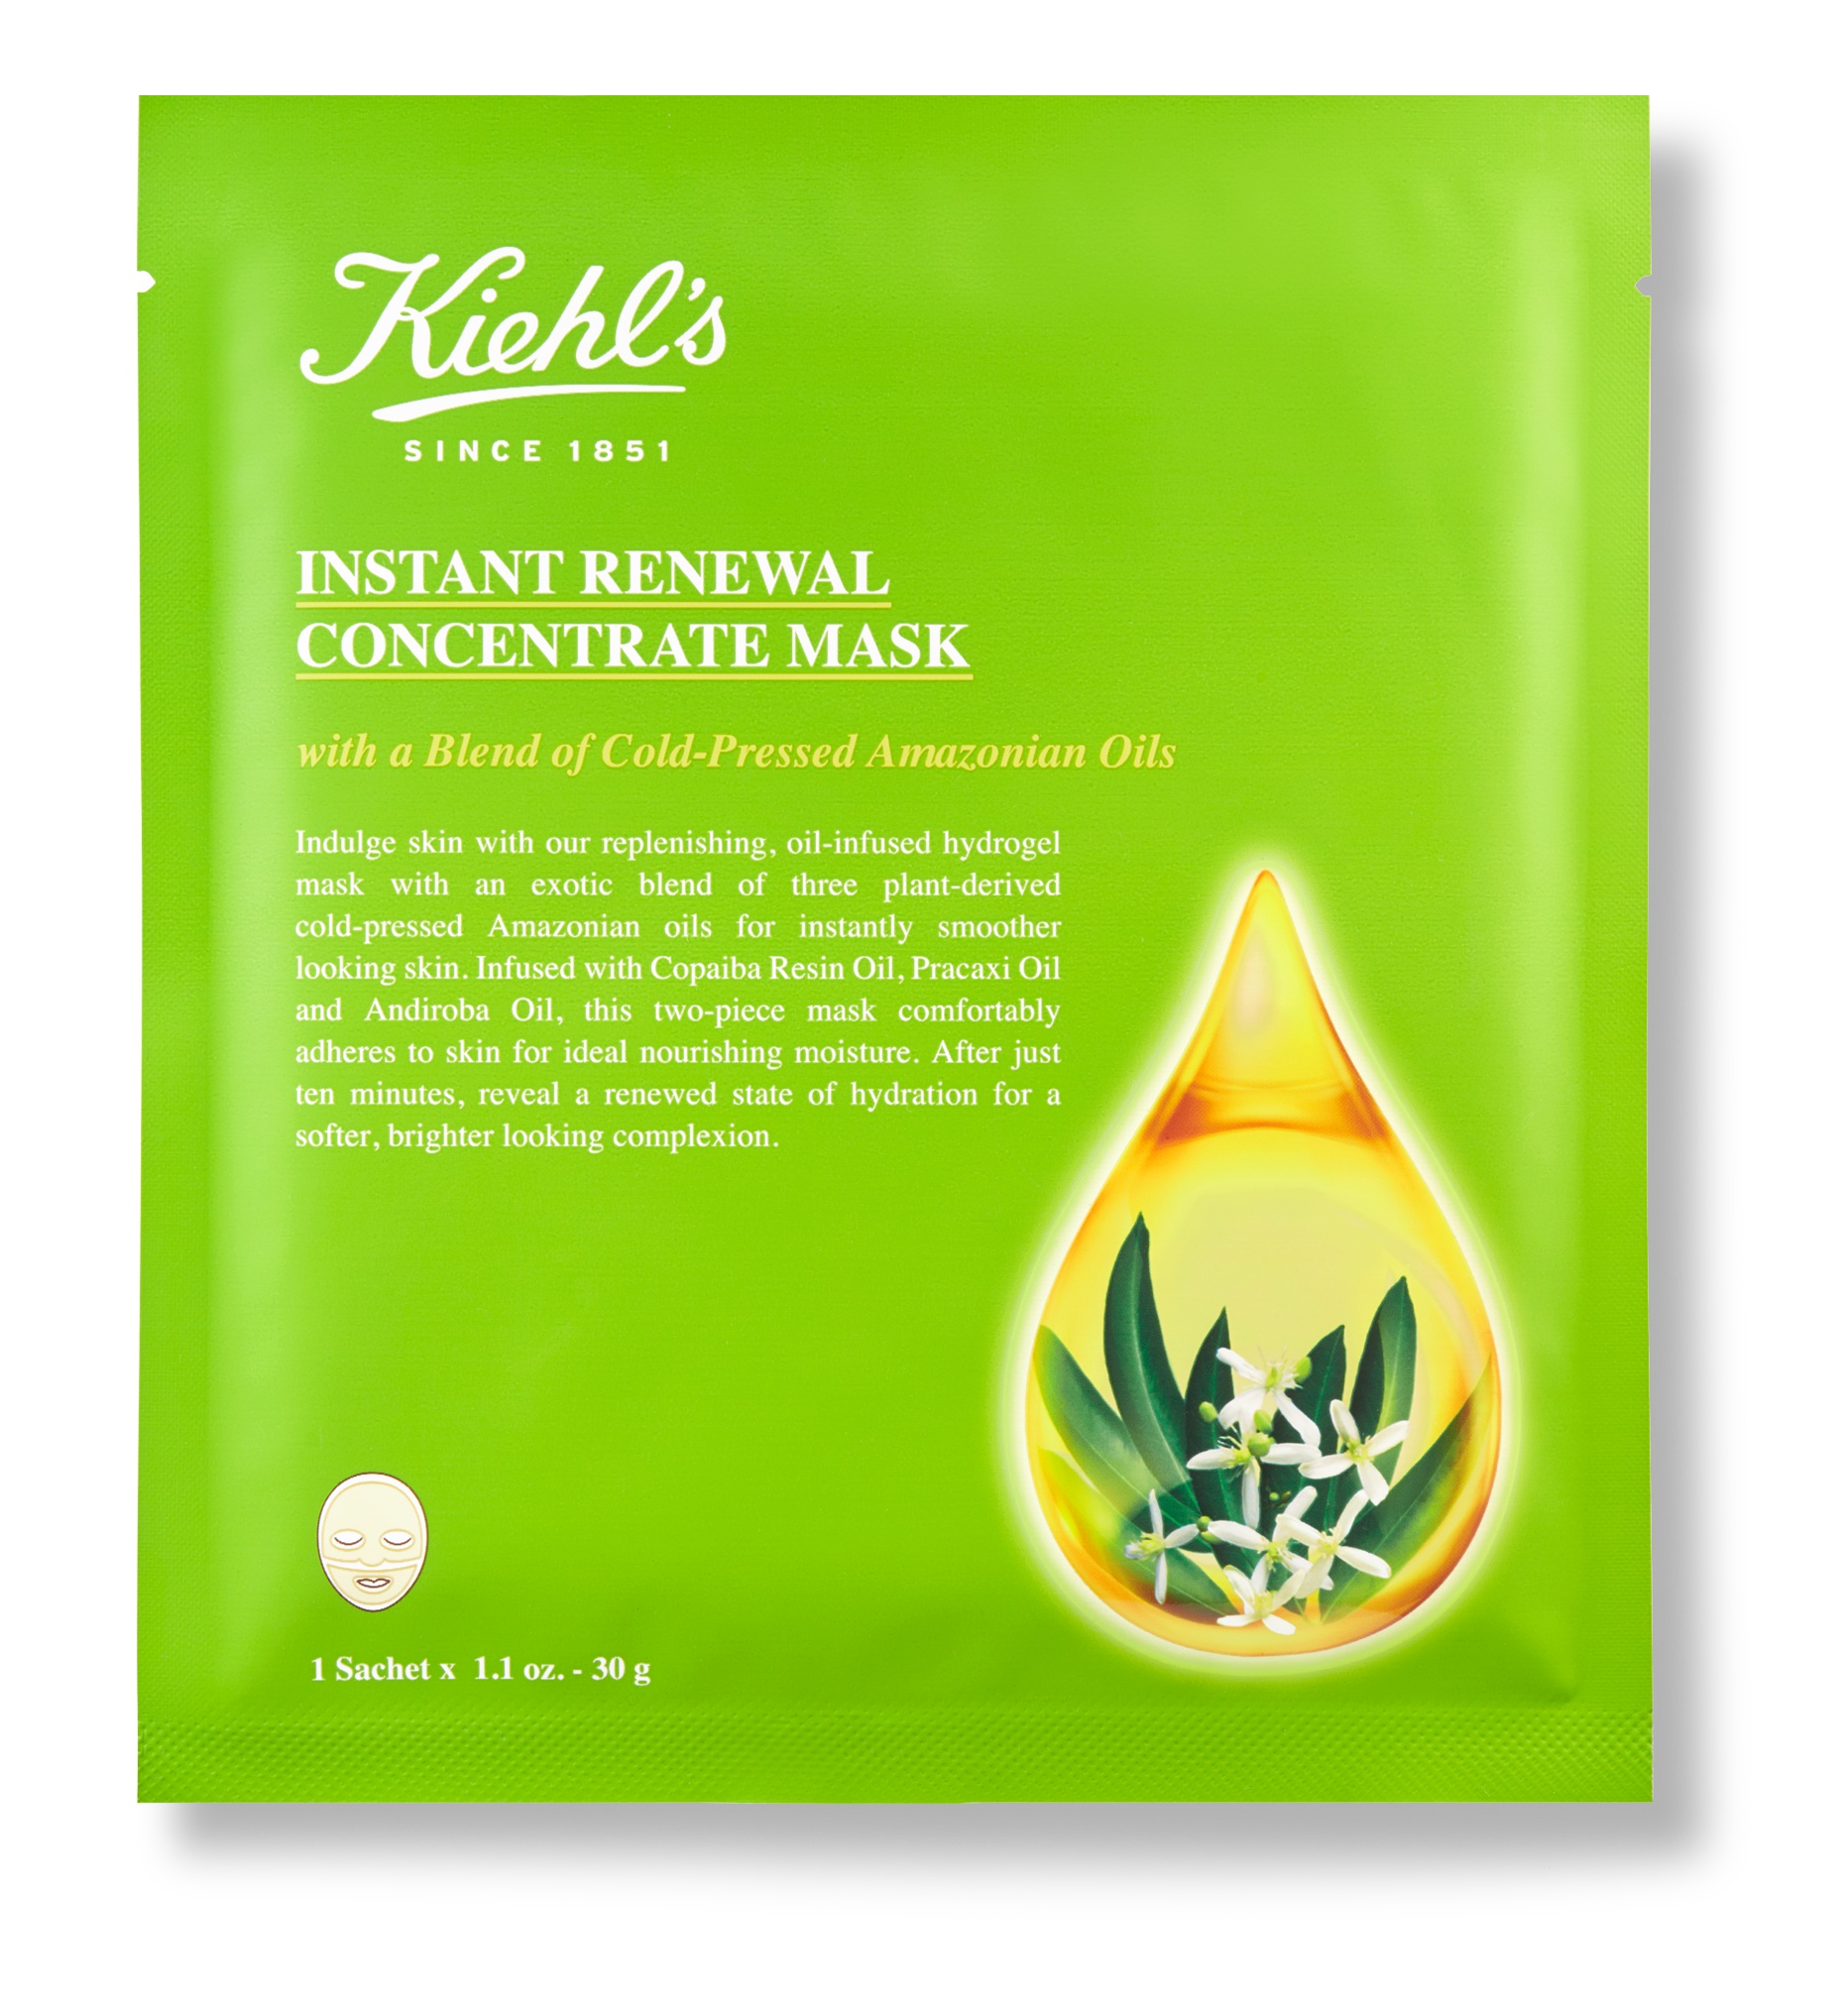 Kiehl’s Instant Renewal Concentrate Mask